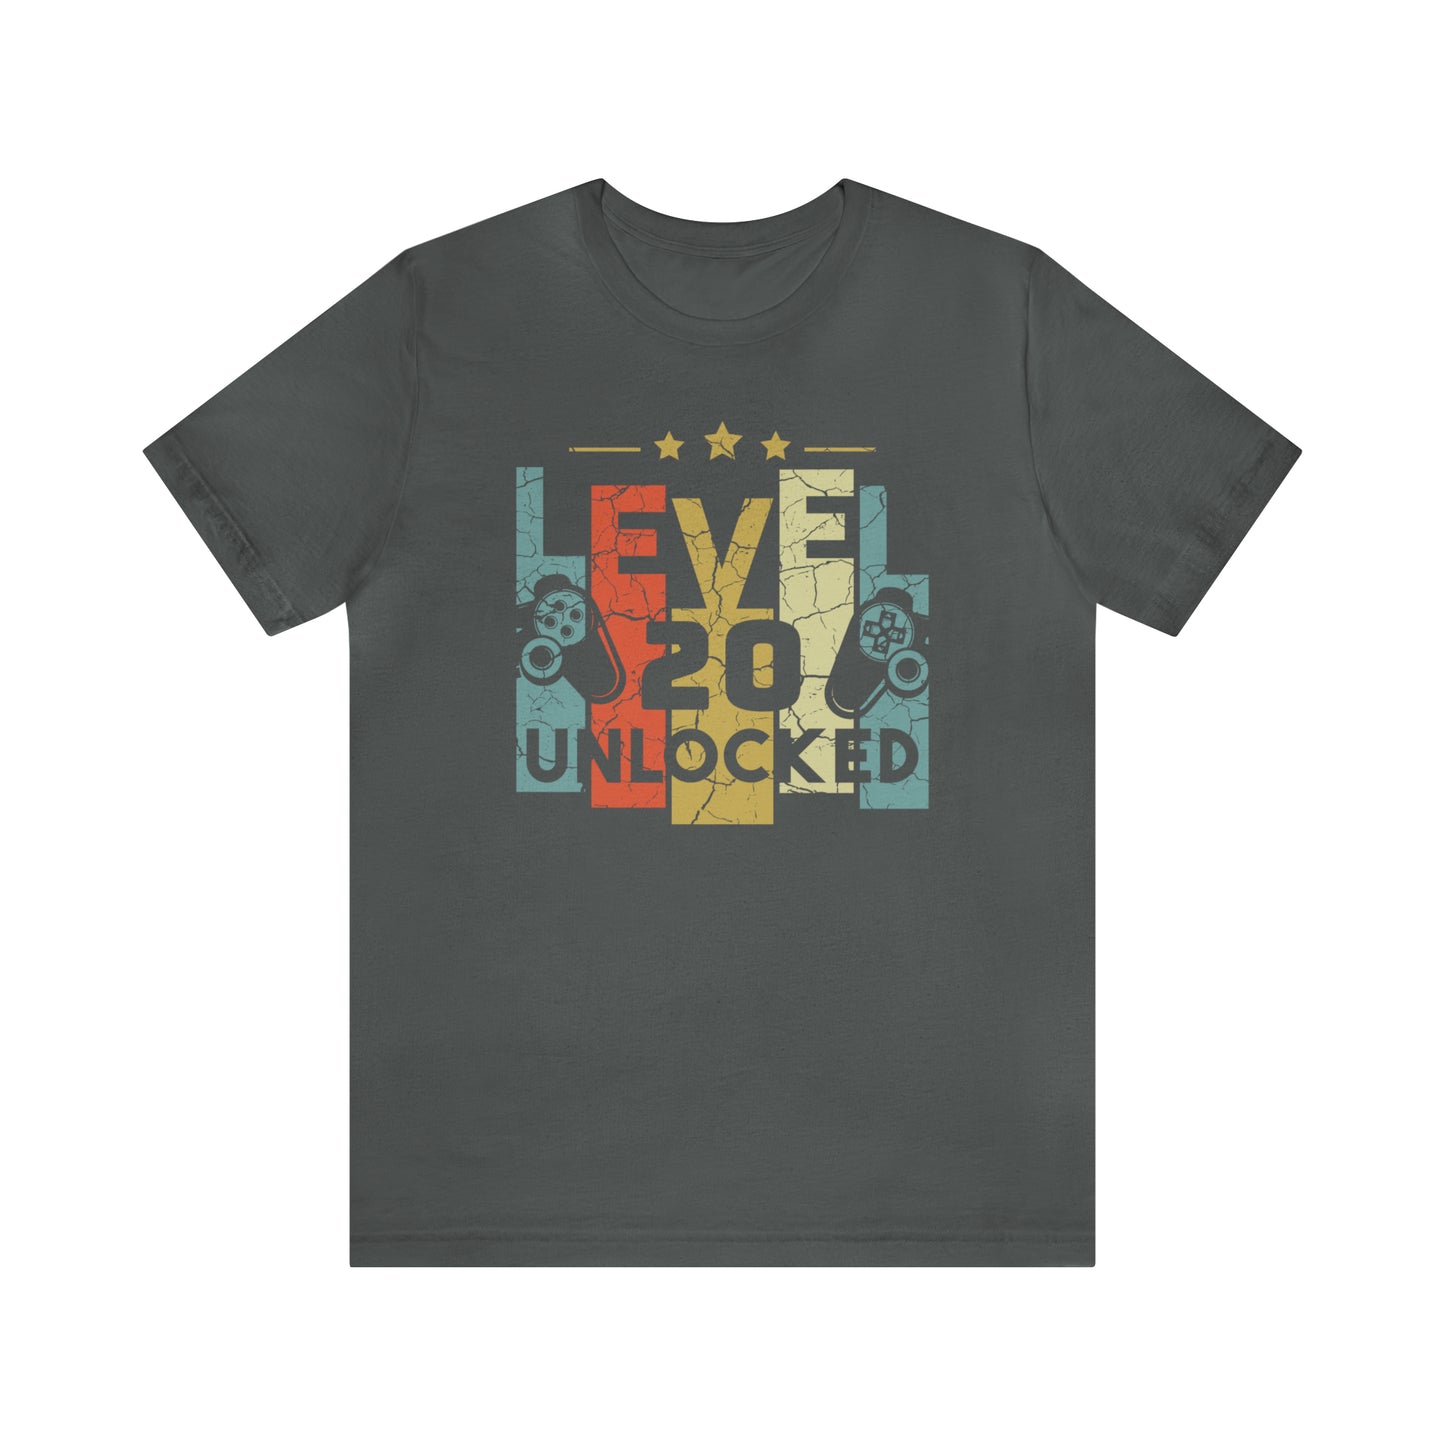 20th Birthday Gift for son or daughter, Level 20 Unlocked Funny Gamer Shirt for boy or nephew